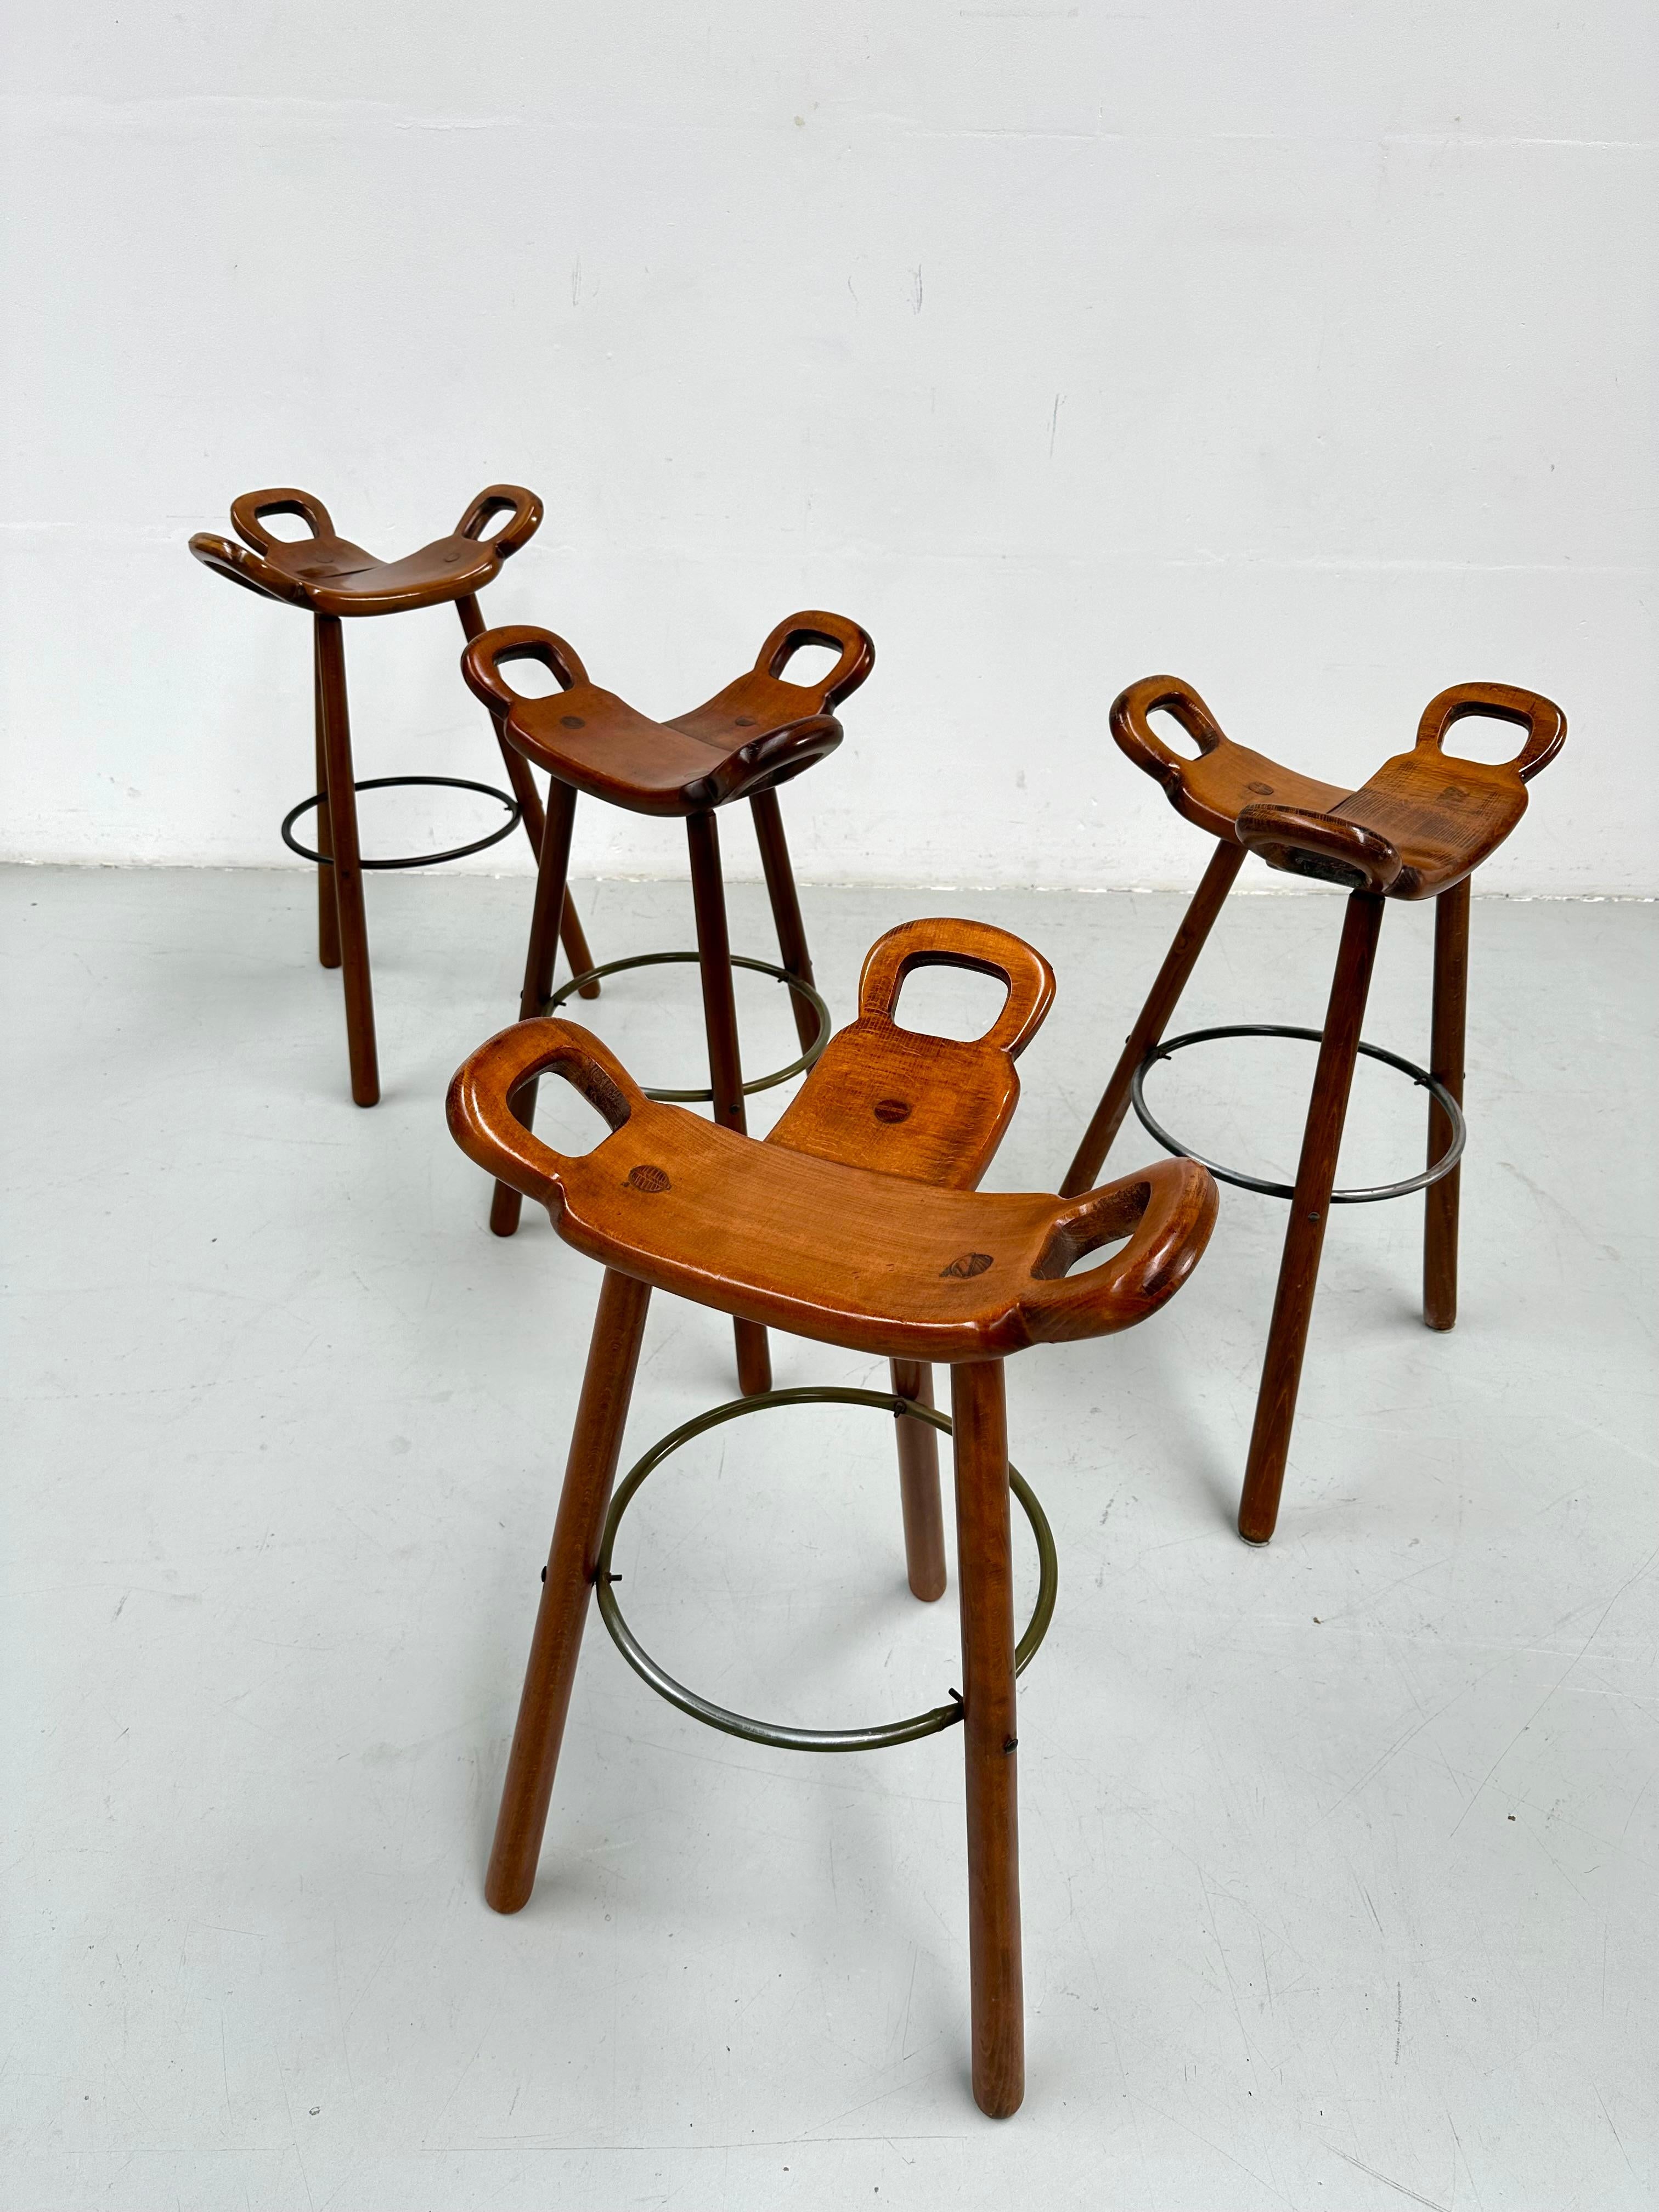 Metal Set of 4 Marbella Brutalist Stools by Sergio Rodrigues for Confonorm 1970s.